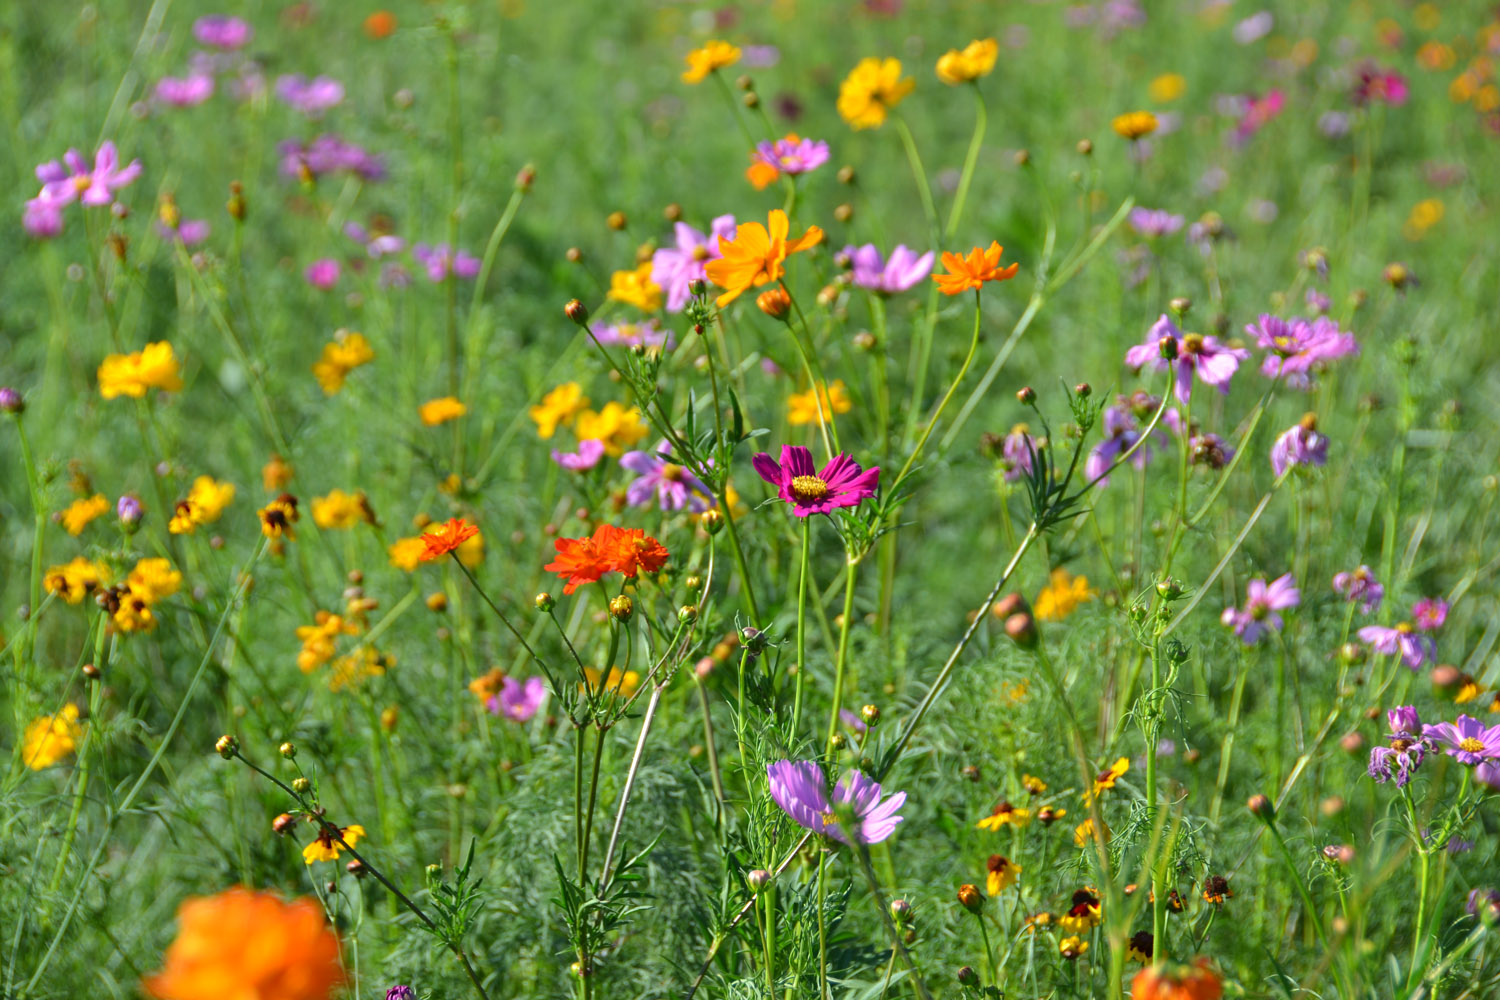 Flowers in a green field include orange, yellow and pink blooms.